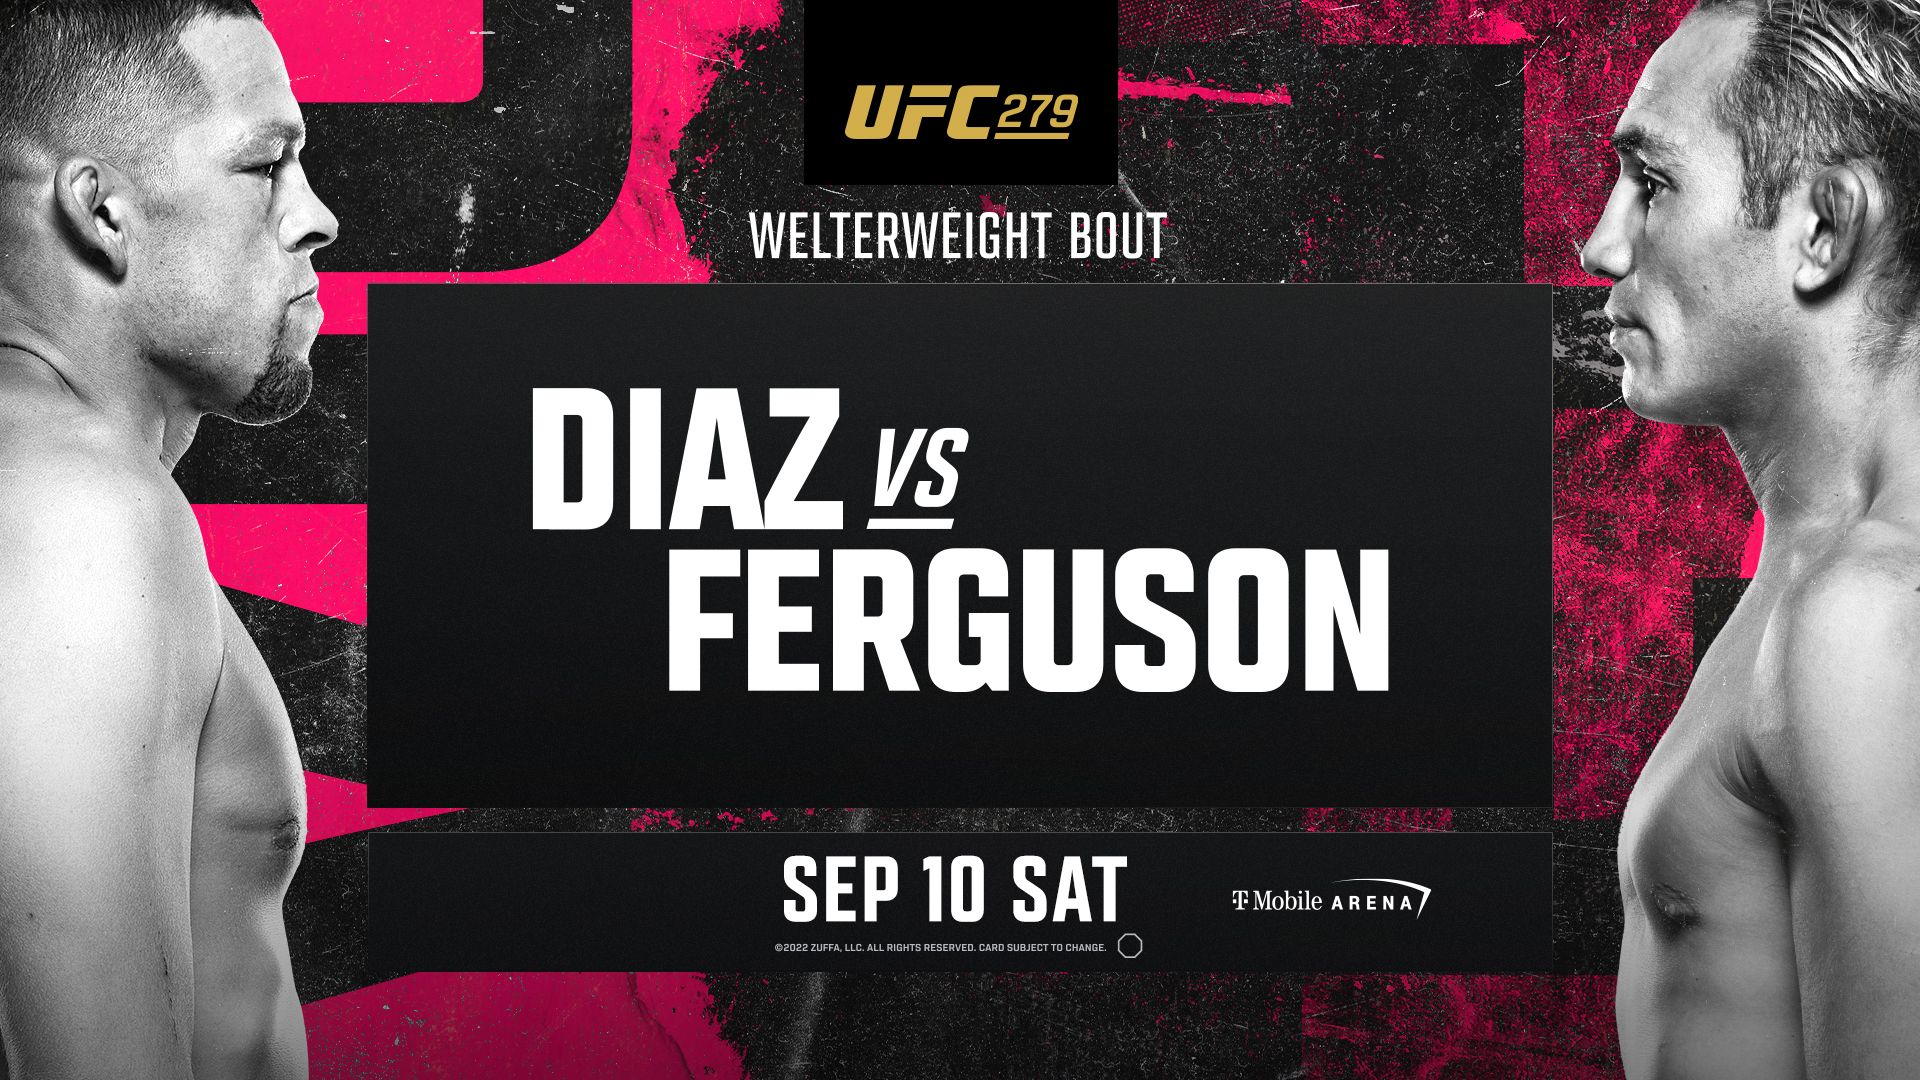 UFC 279 Date, Fight Card, Location, Main Event Changes and more